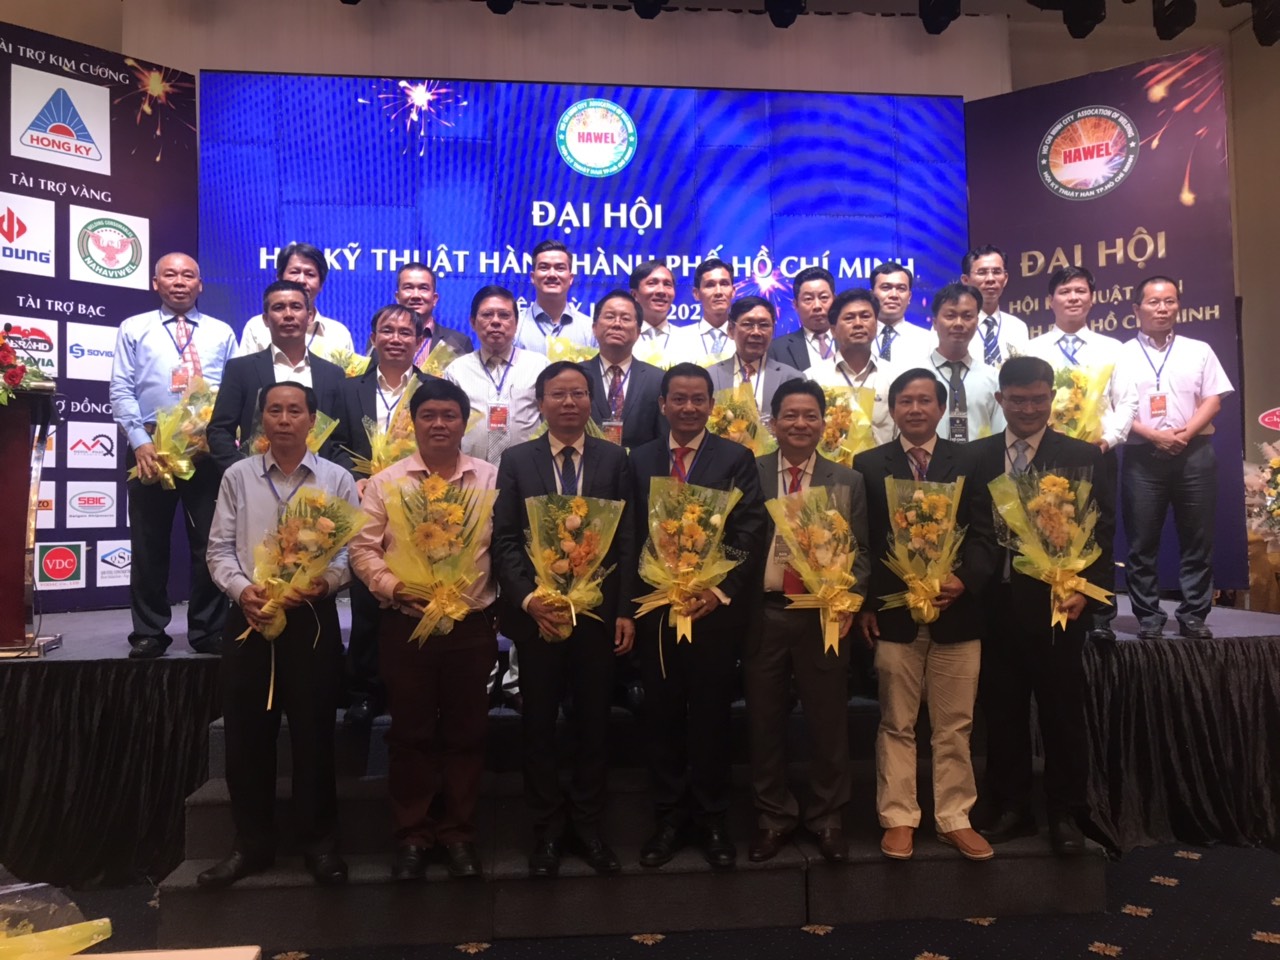 WELDING TECHNOLOGY CONFERENCE HO CHI MINH CITY THE FIRST TERM (2020 -2025)